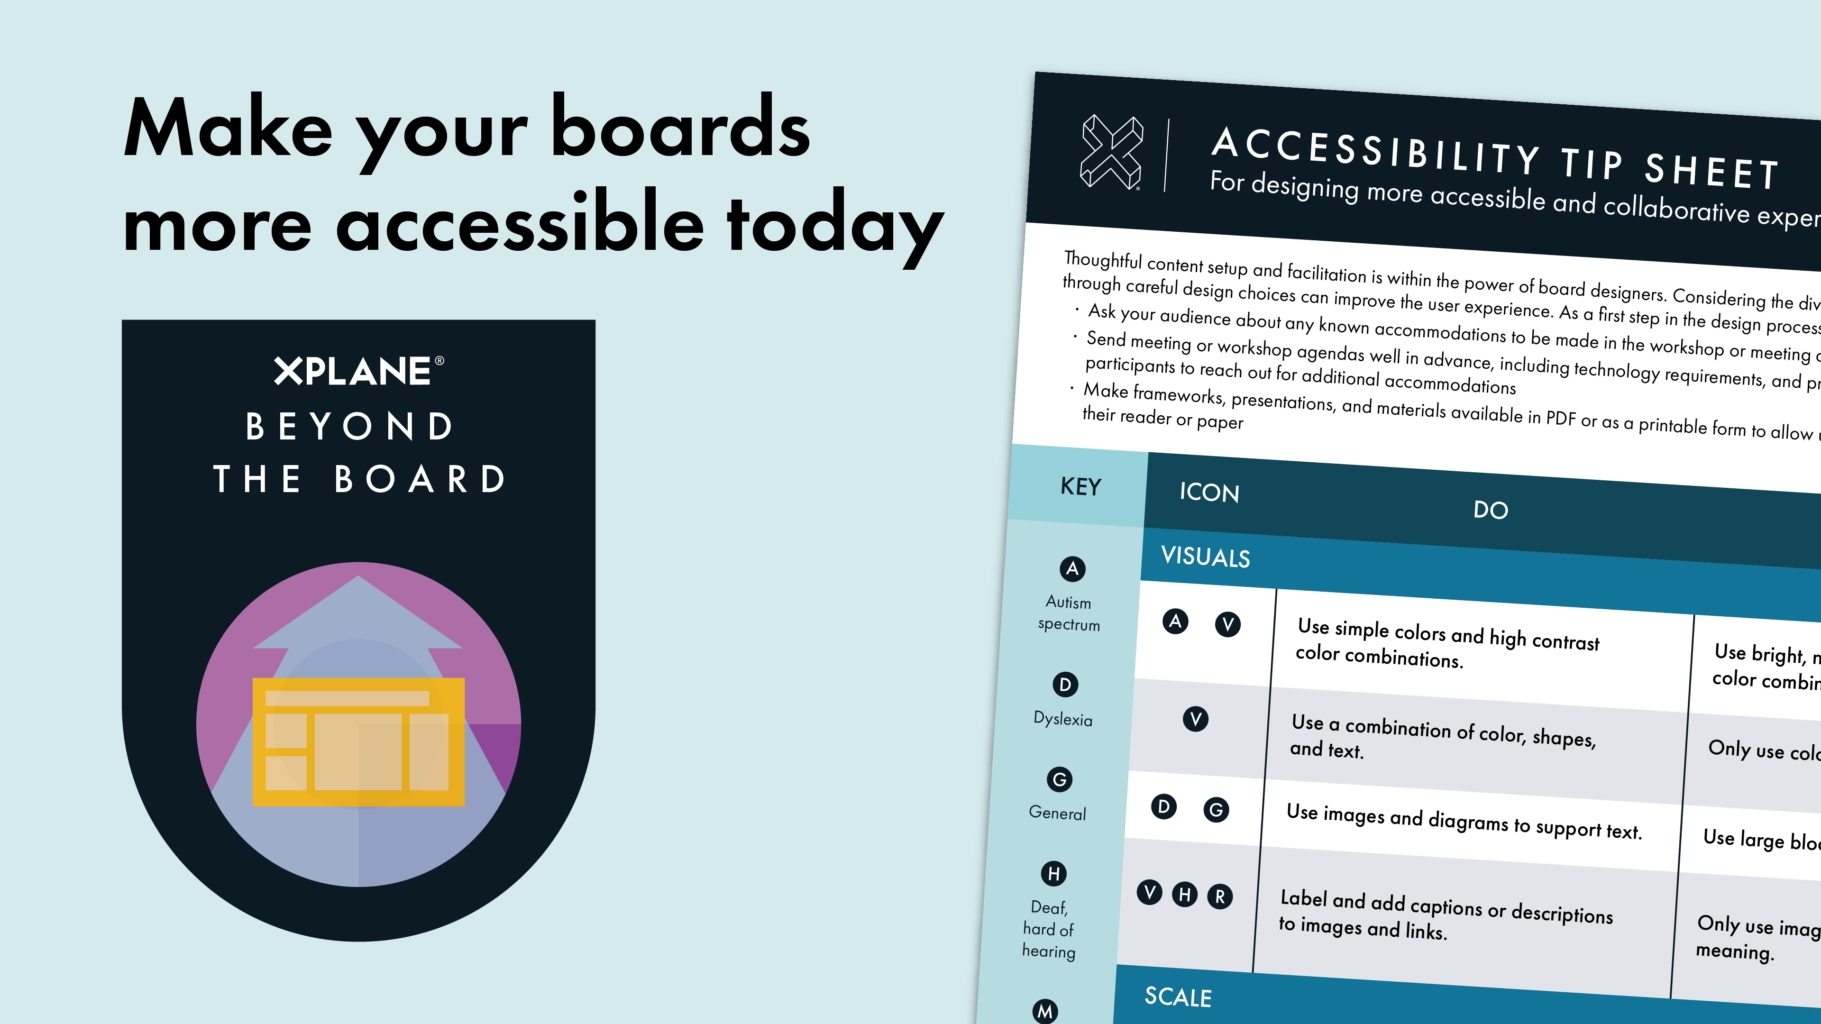 Image of the Beyond the Board course syllabus peeks from the right next to text reading "Make your boards more accessible today" above an image of the Beyond the Board course badge. Against a light blue background.